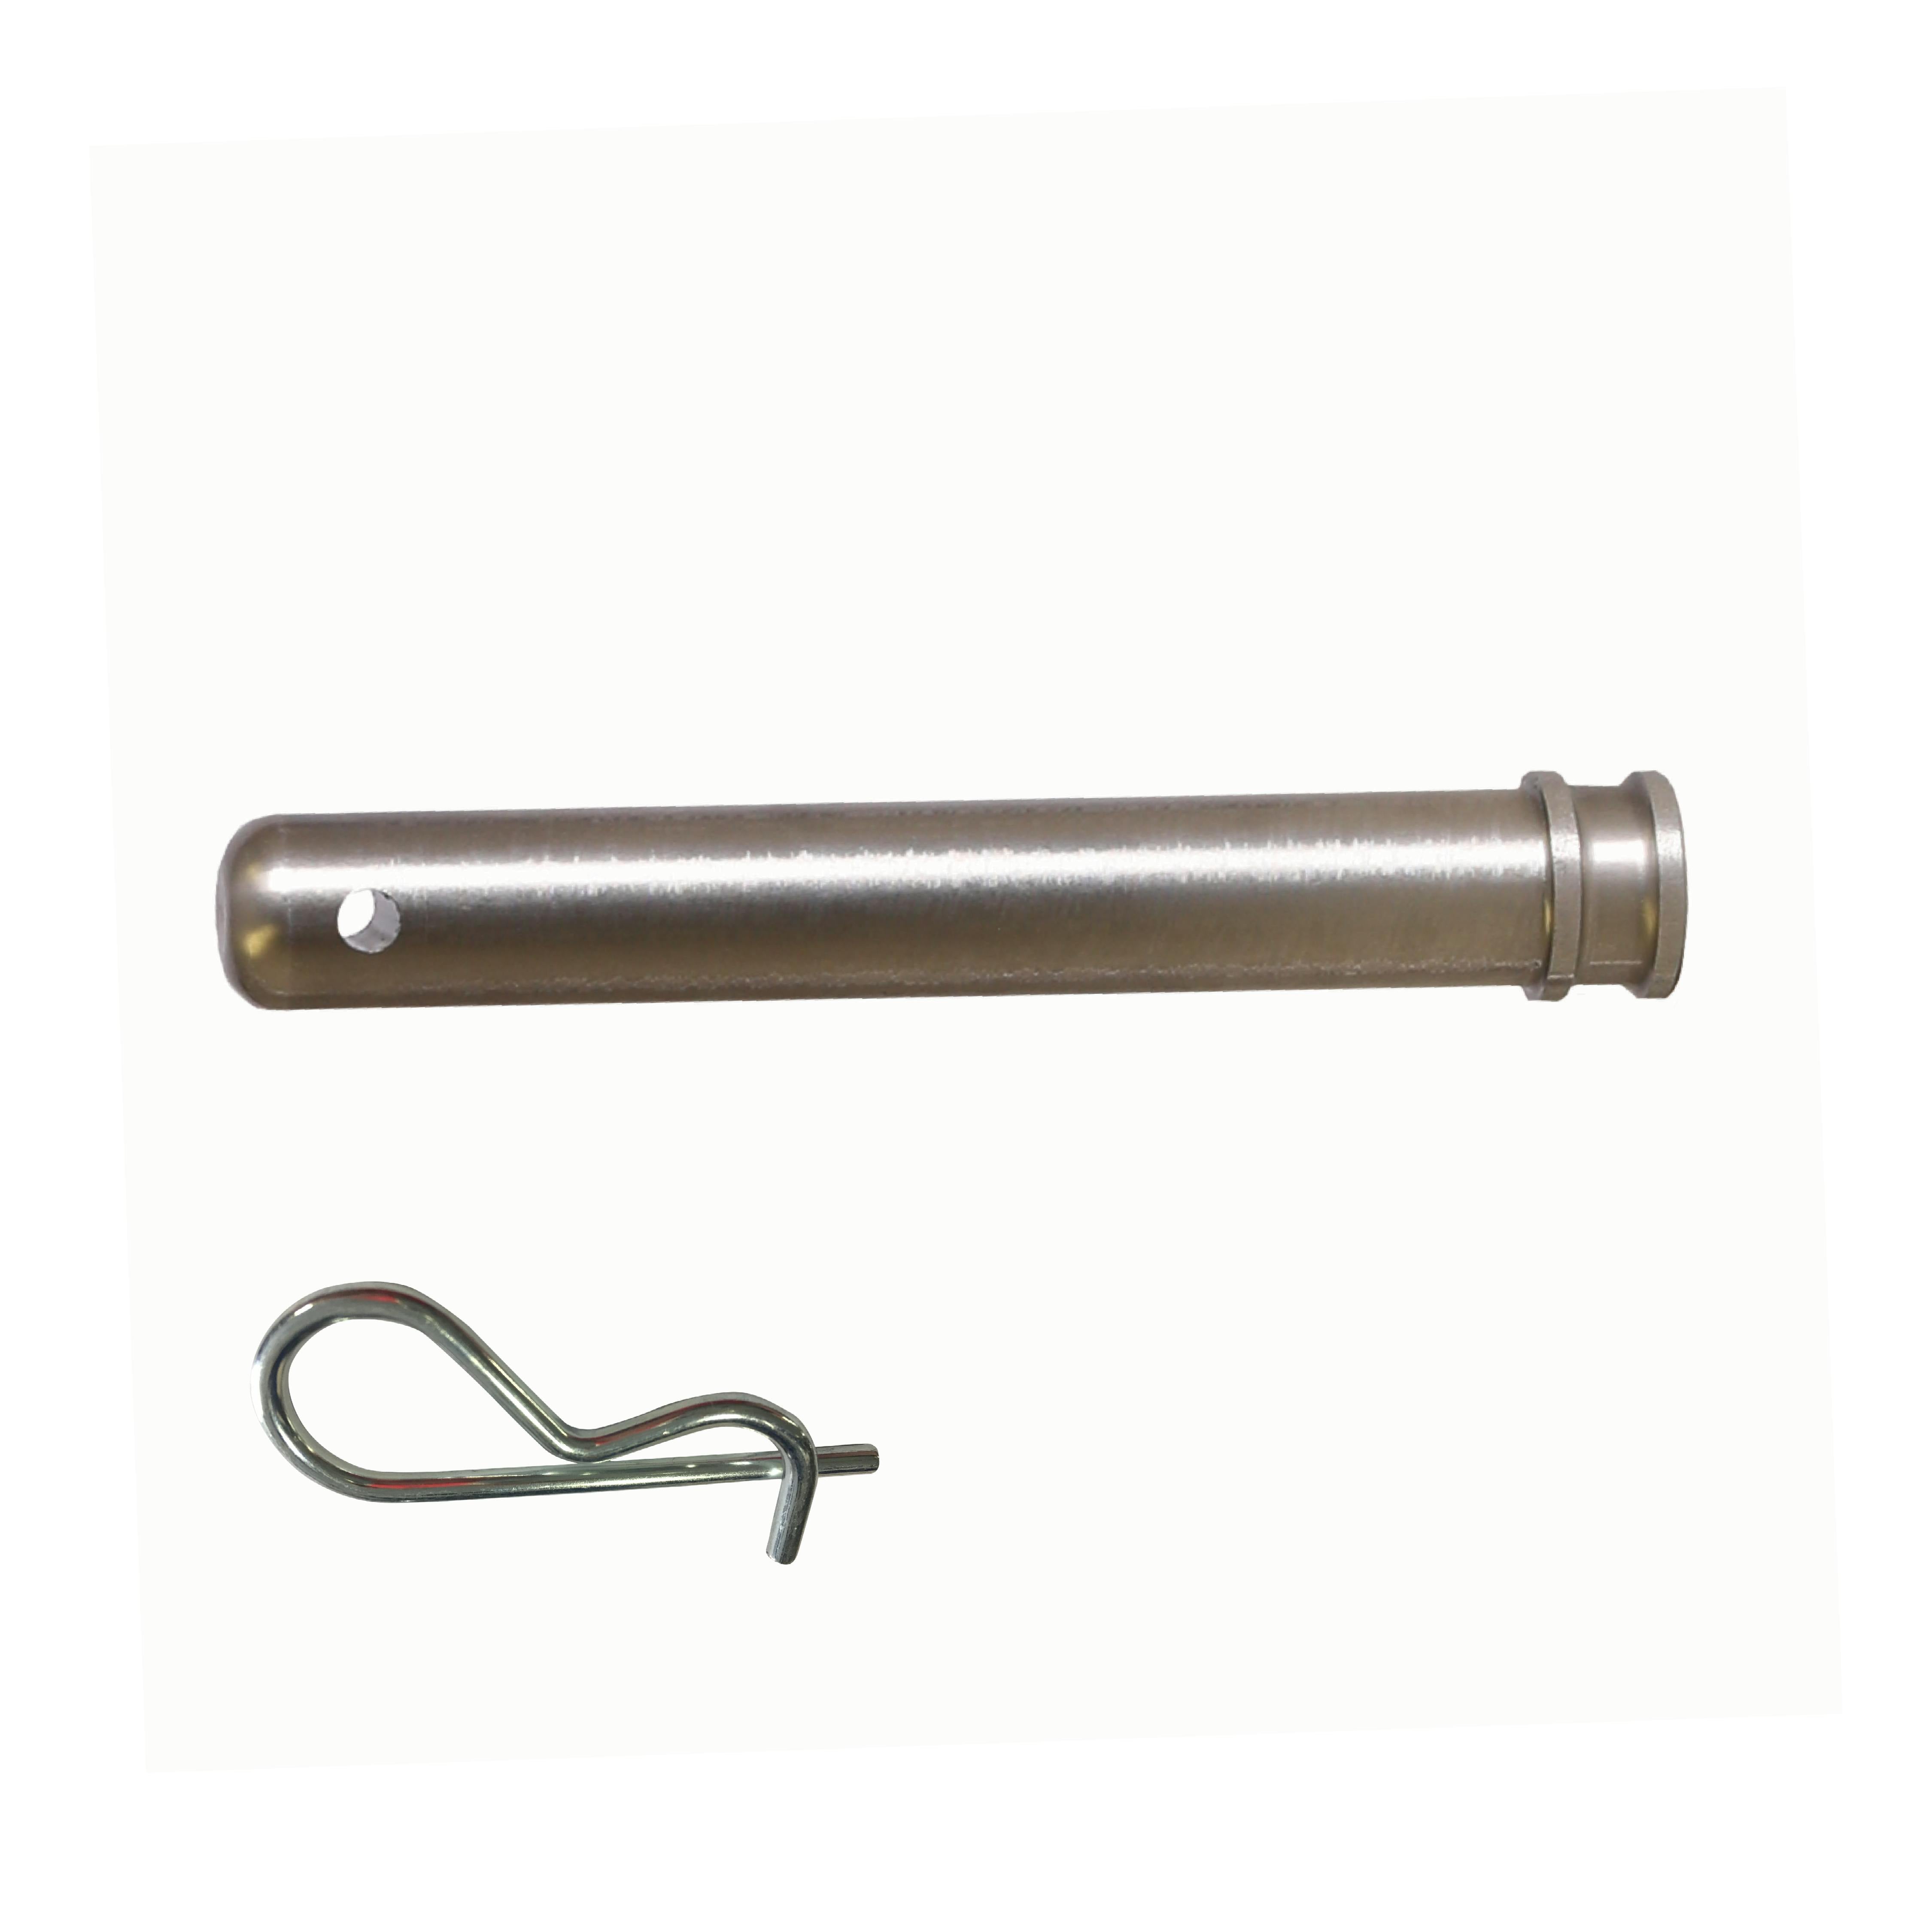 GEN-Y Hitch GH-097 3/4in Hitch Pin 4.25in Useable Length and Twist Clip